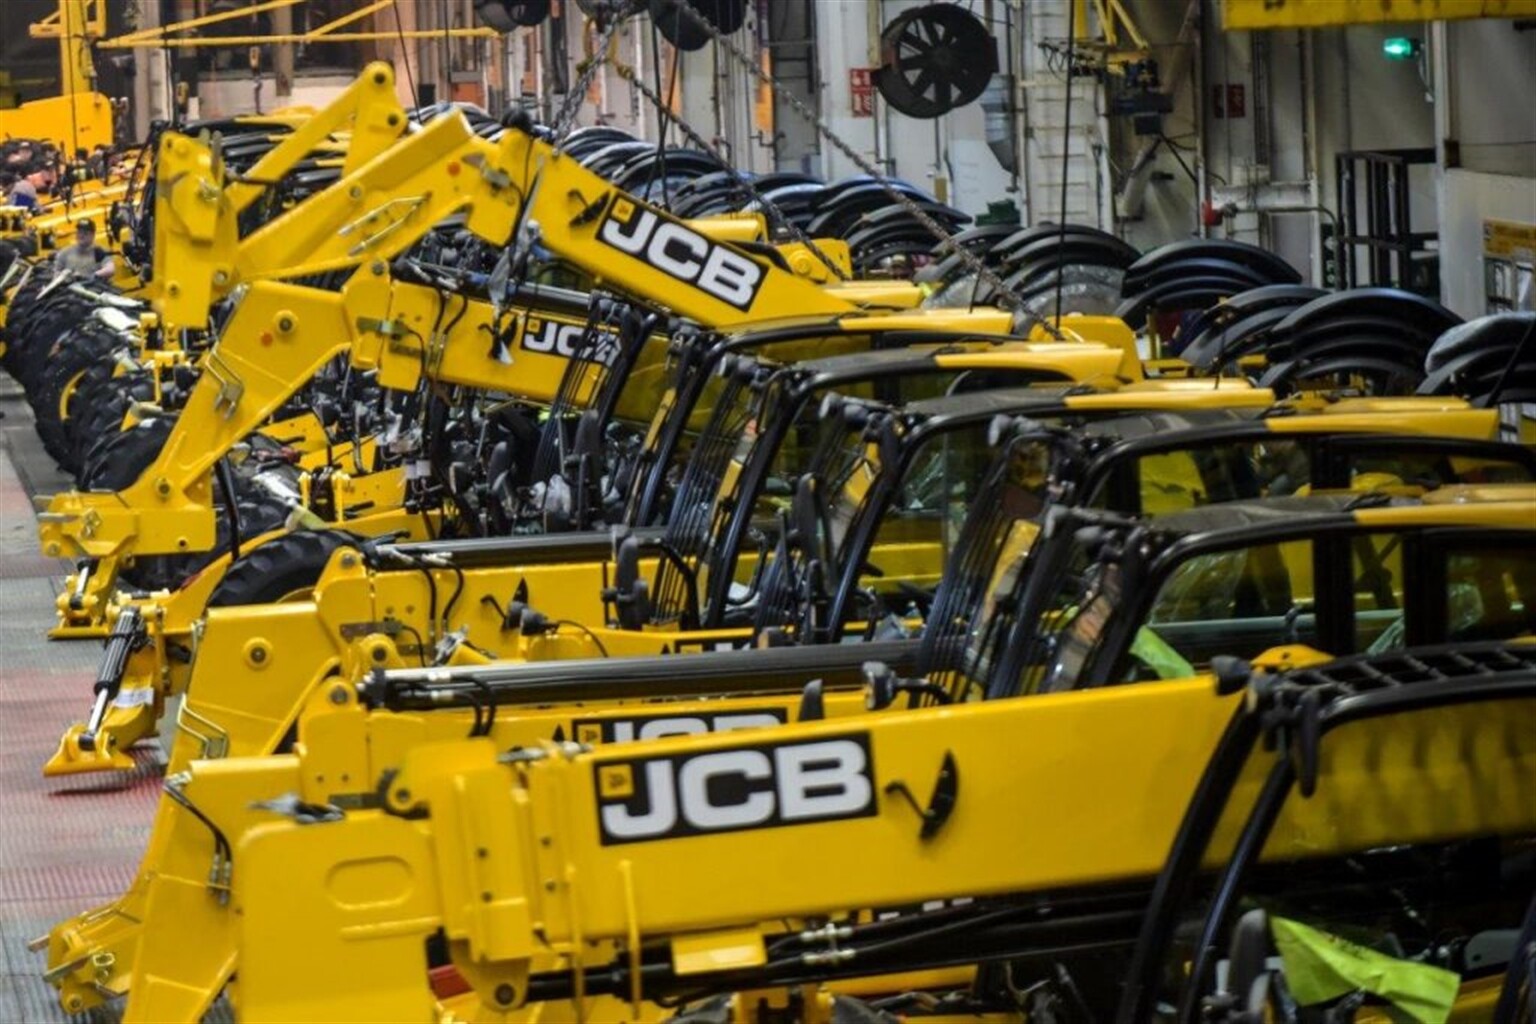 JCB employees get New Year pay rise of 3.9% thanks to strong outlook